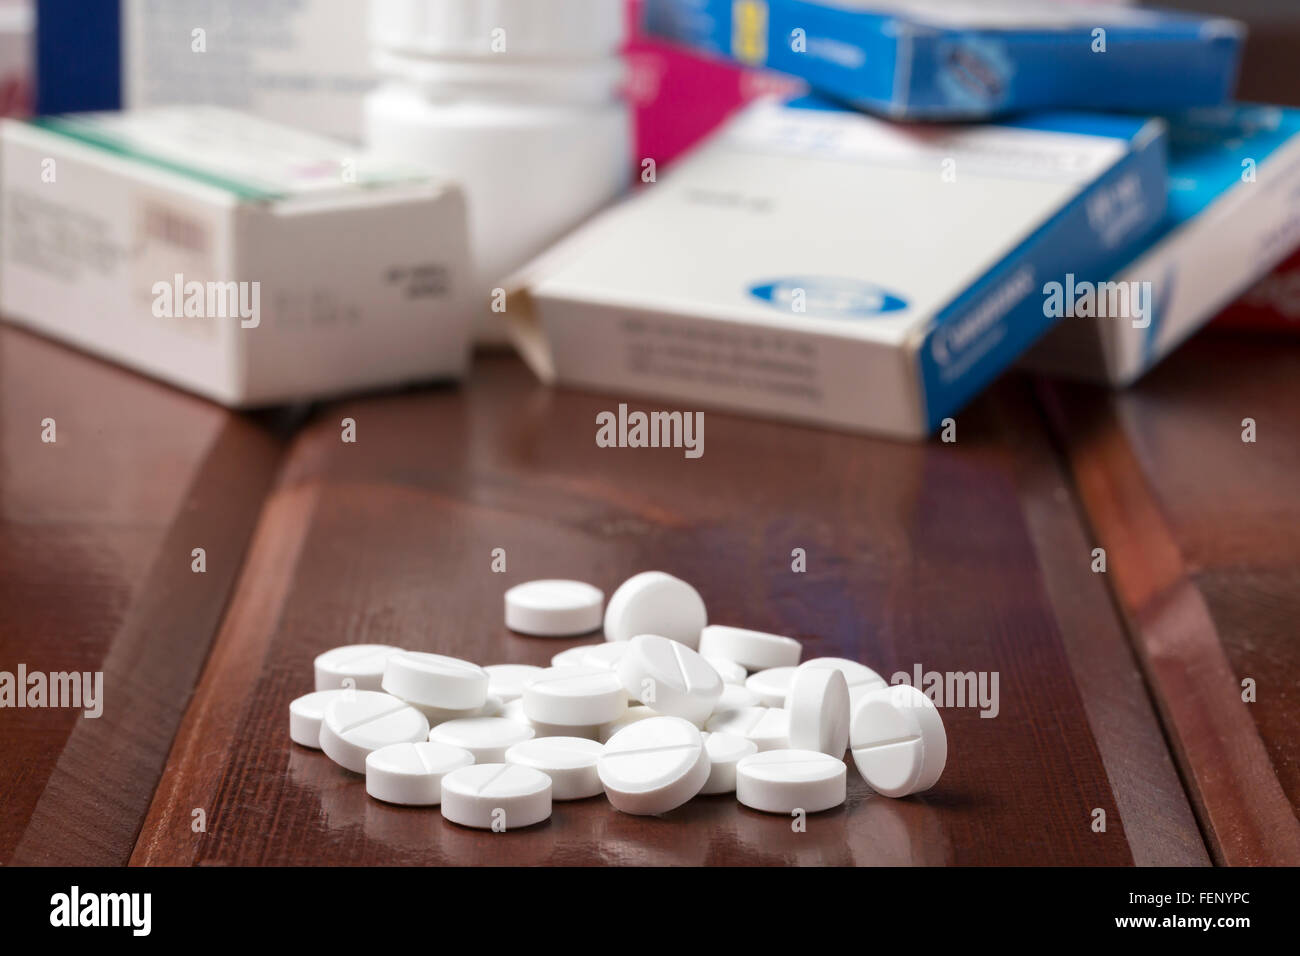 White round pills and various pill boxes Stock Photo